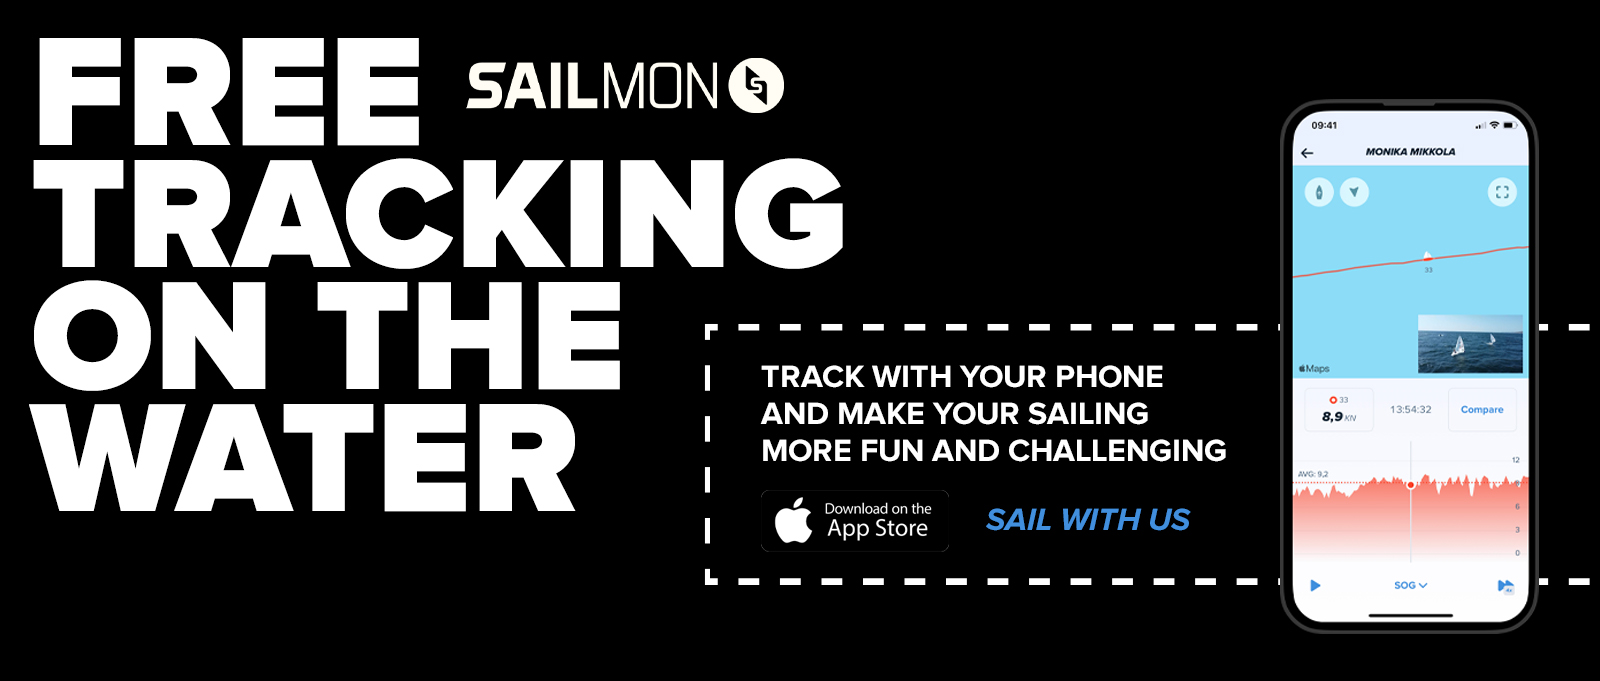 FREE TRACKING ON THE WATER - FOR EVERYONE!